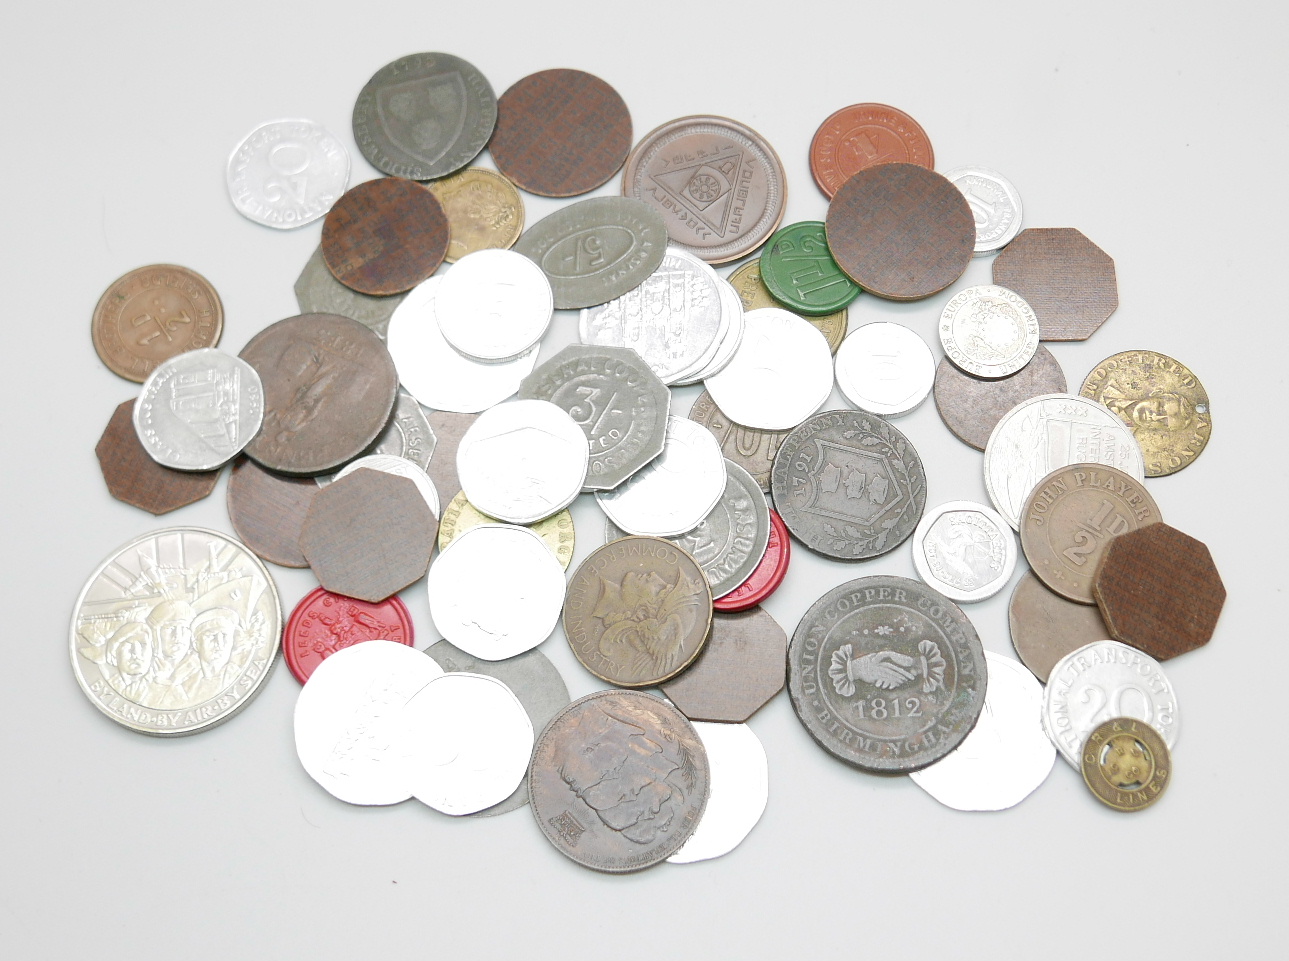 A mixed lot of tokens, transport tokens, etc.